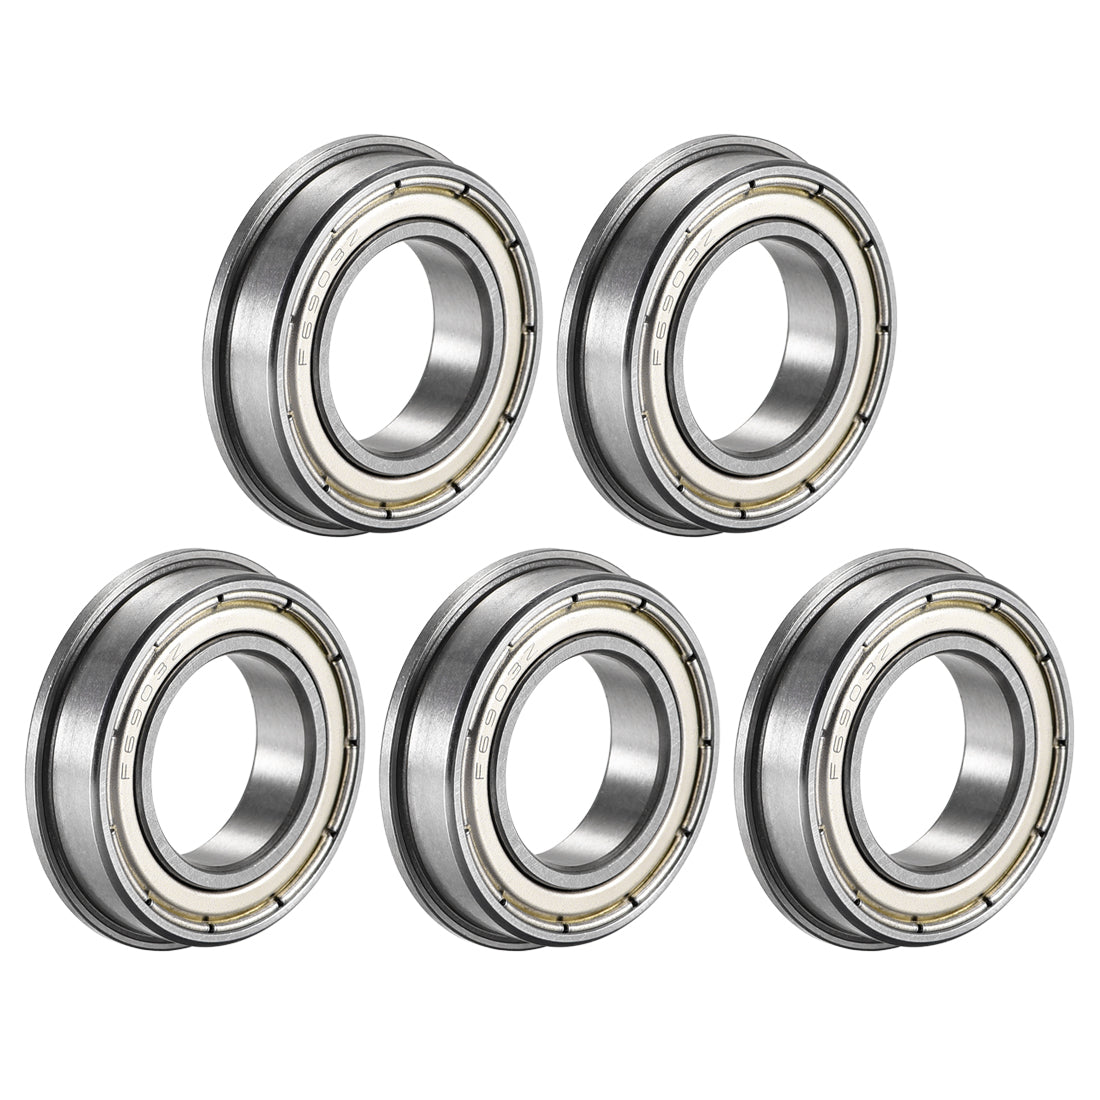 uxcell Uxcell F6903ZZ Flange Ball Bearing 17x30x7mm Double Shielded Chrome Steel Bearings 5pcs